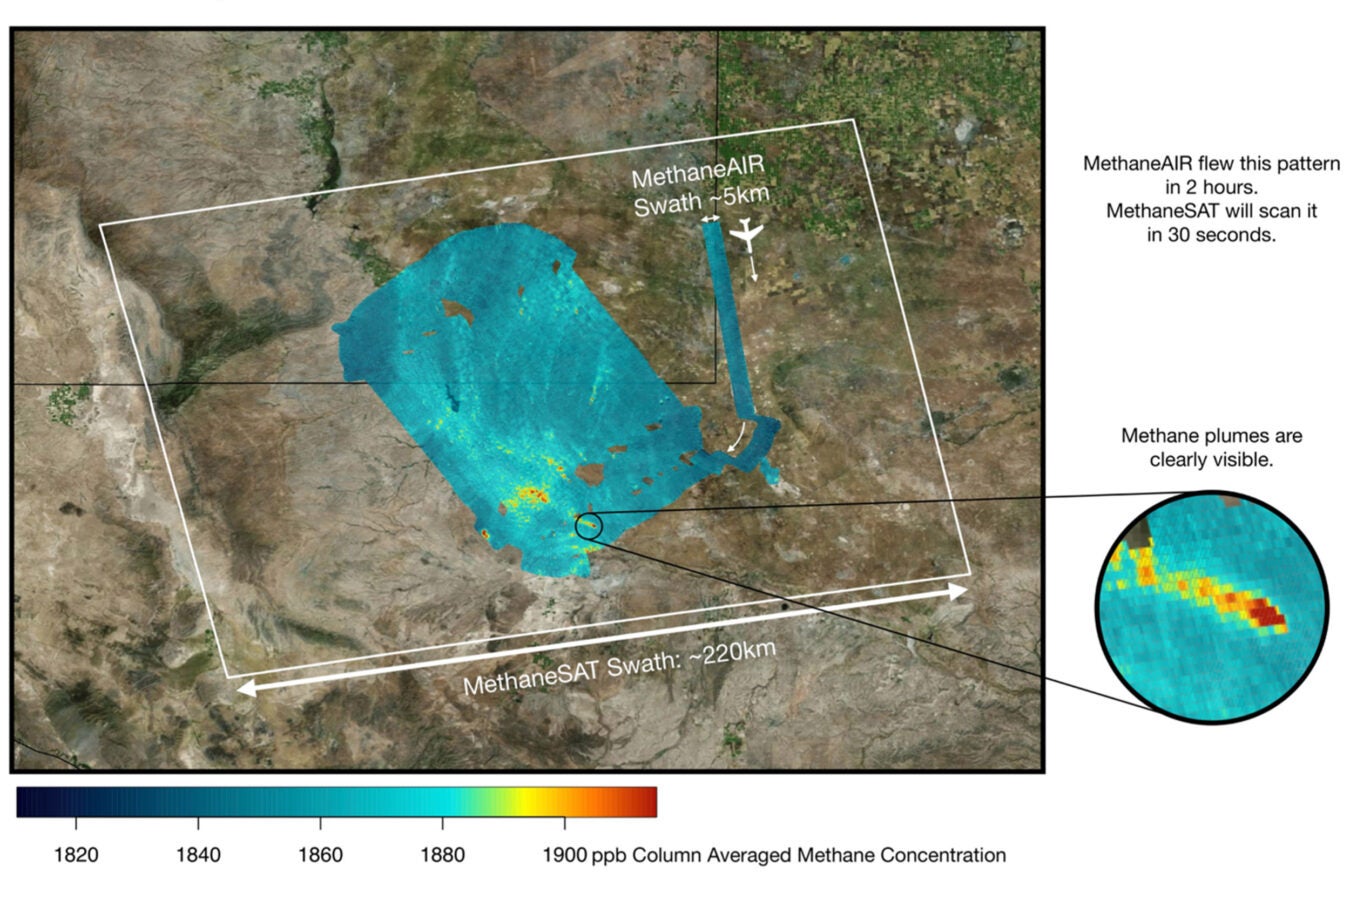 Methane SAT and Methane Air graphic.